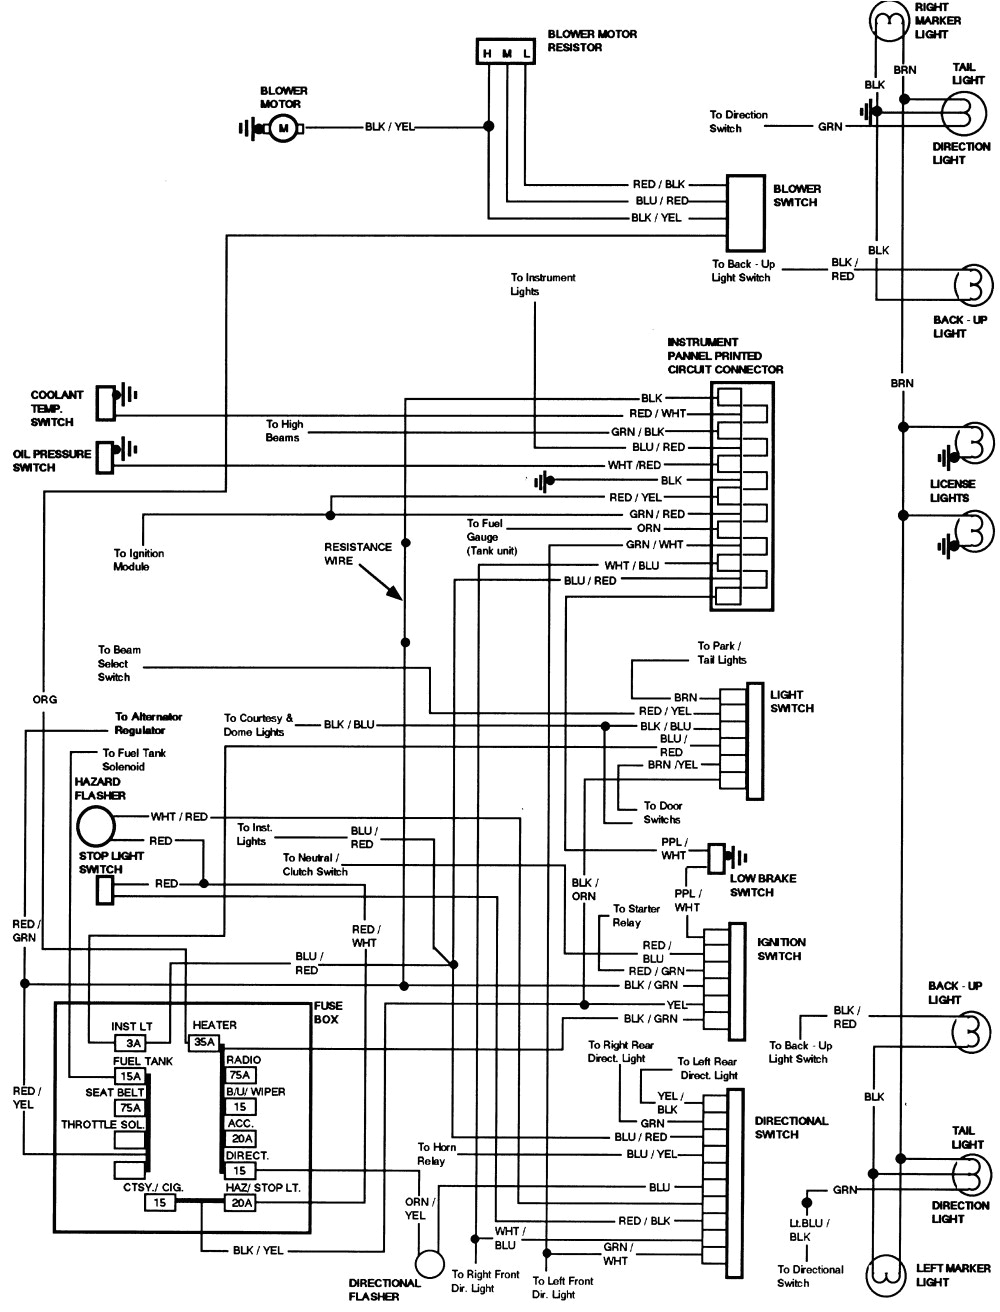 wiring diagram for 1949 ford f1 wiring diagrams value 1949 ford 8n wiring diagram 1949 ford wiring diagram